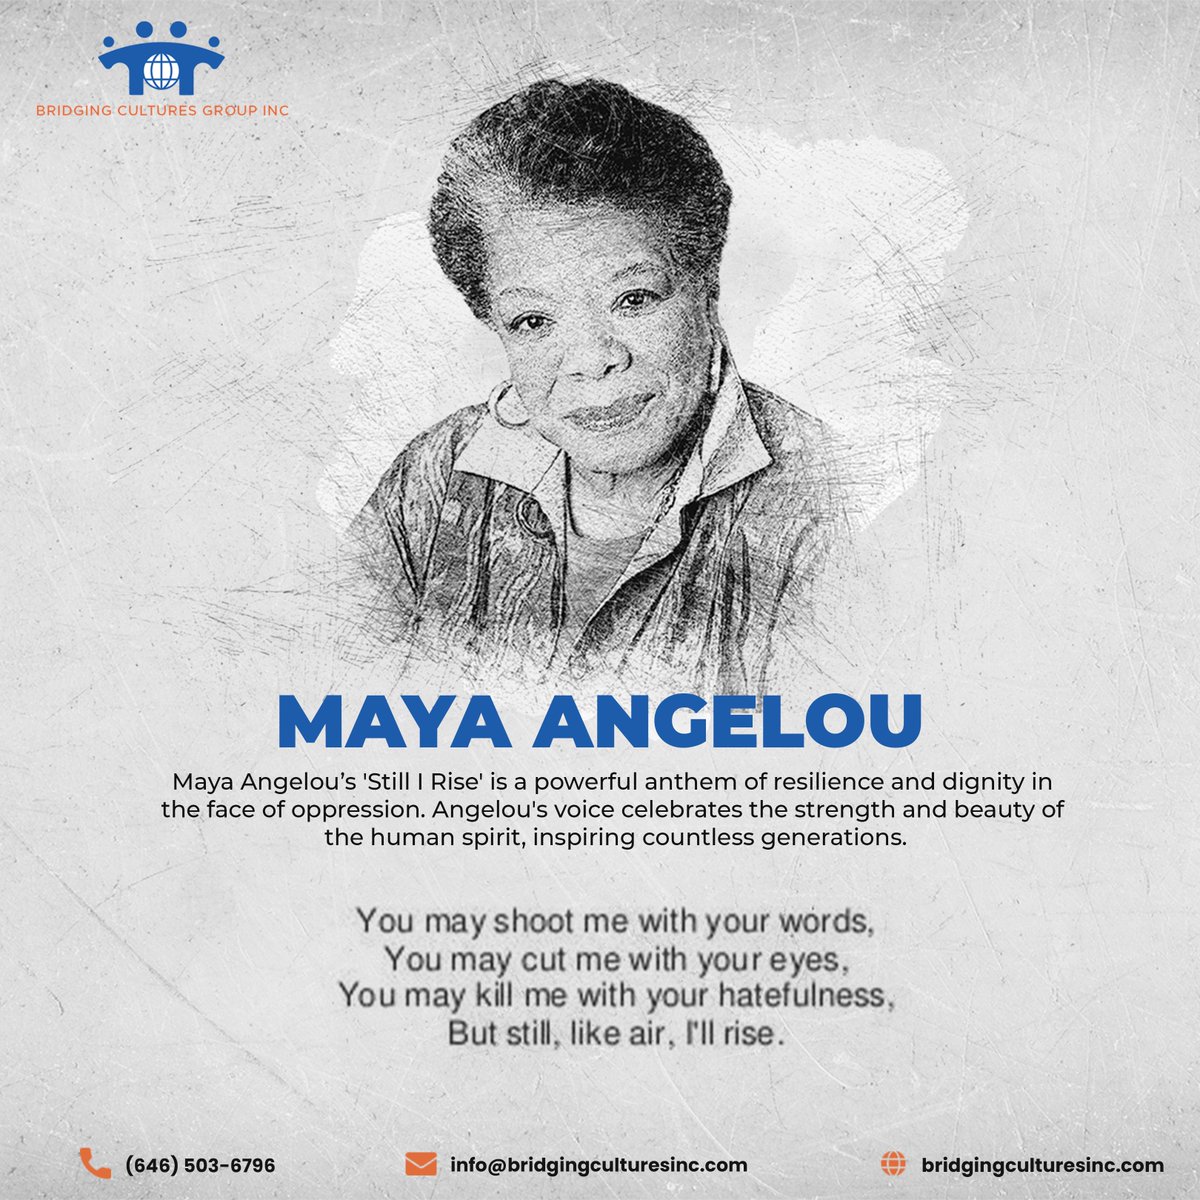 This National Poetry Month, Bridging Cultures Group honors Maya Angelou's powerful poem 'Still I Rise.' Her words champion resilience and courage, inspiring us all to rise above adversity with dignity. 

#BCG #DEI #NationalPoetryMonth #MayaAngelou #StillIRise